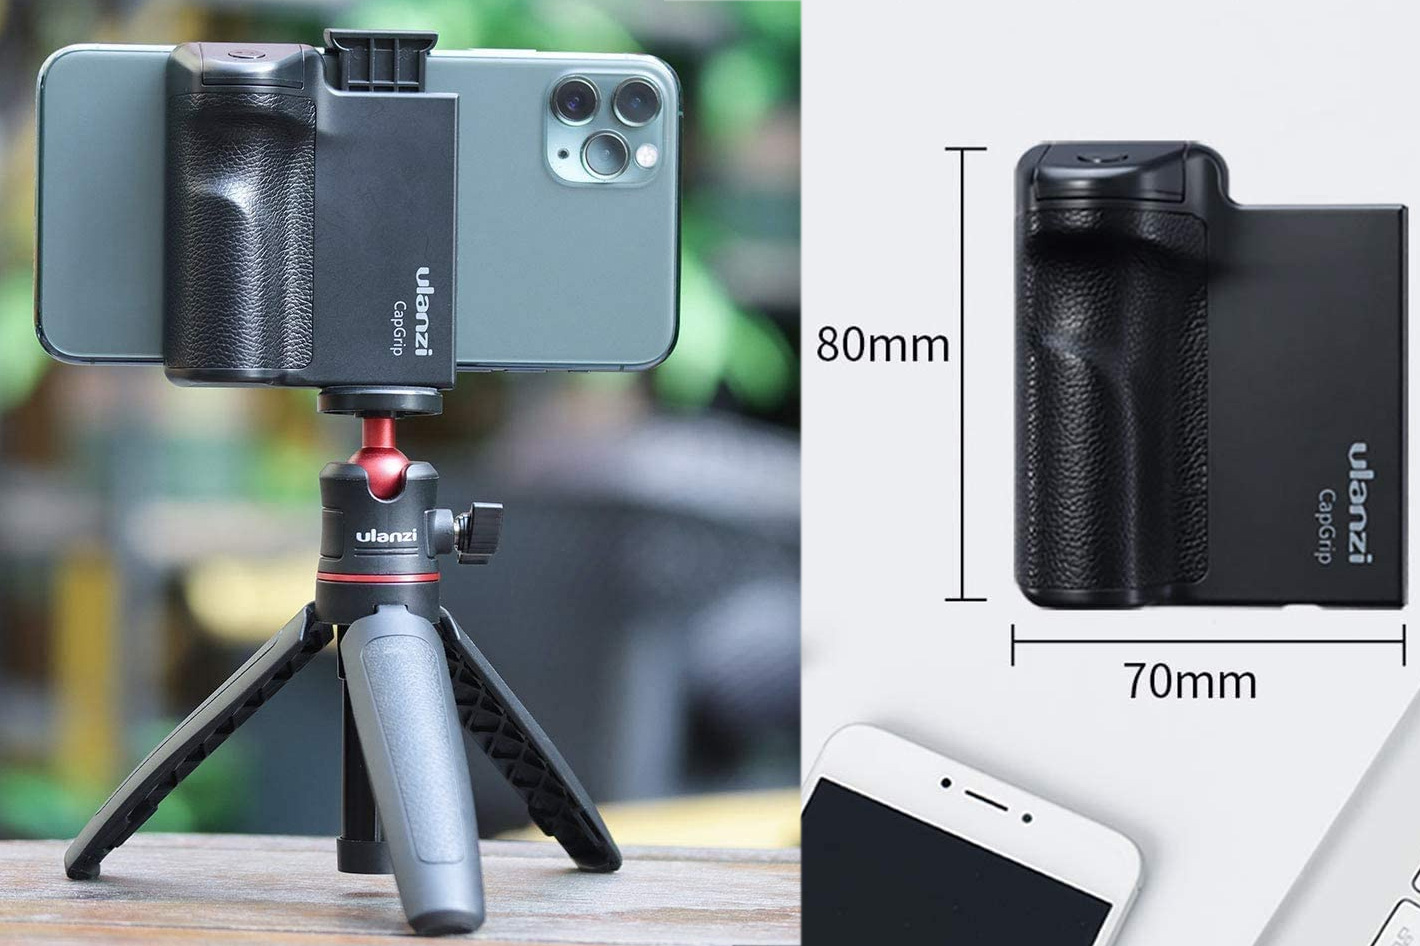 Need stability? Get a ShiftCam ProGrip for your smartphone